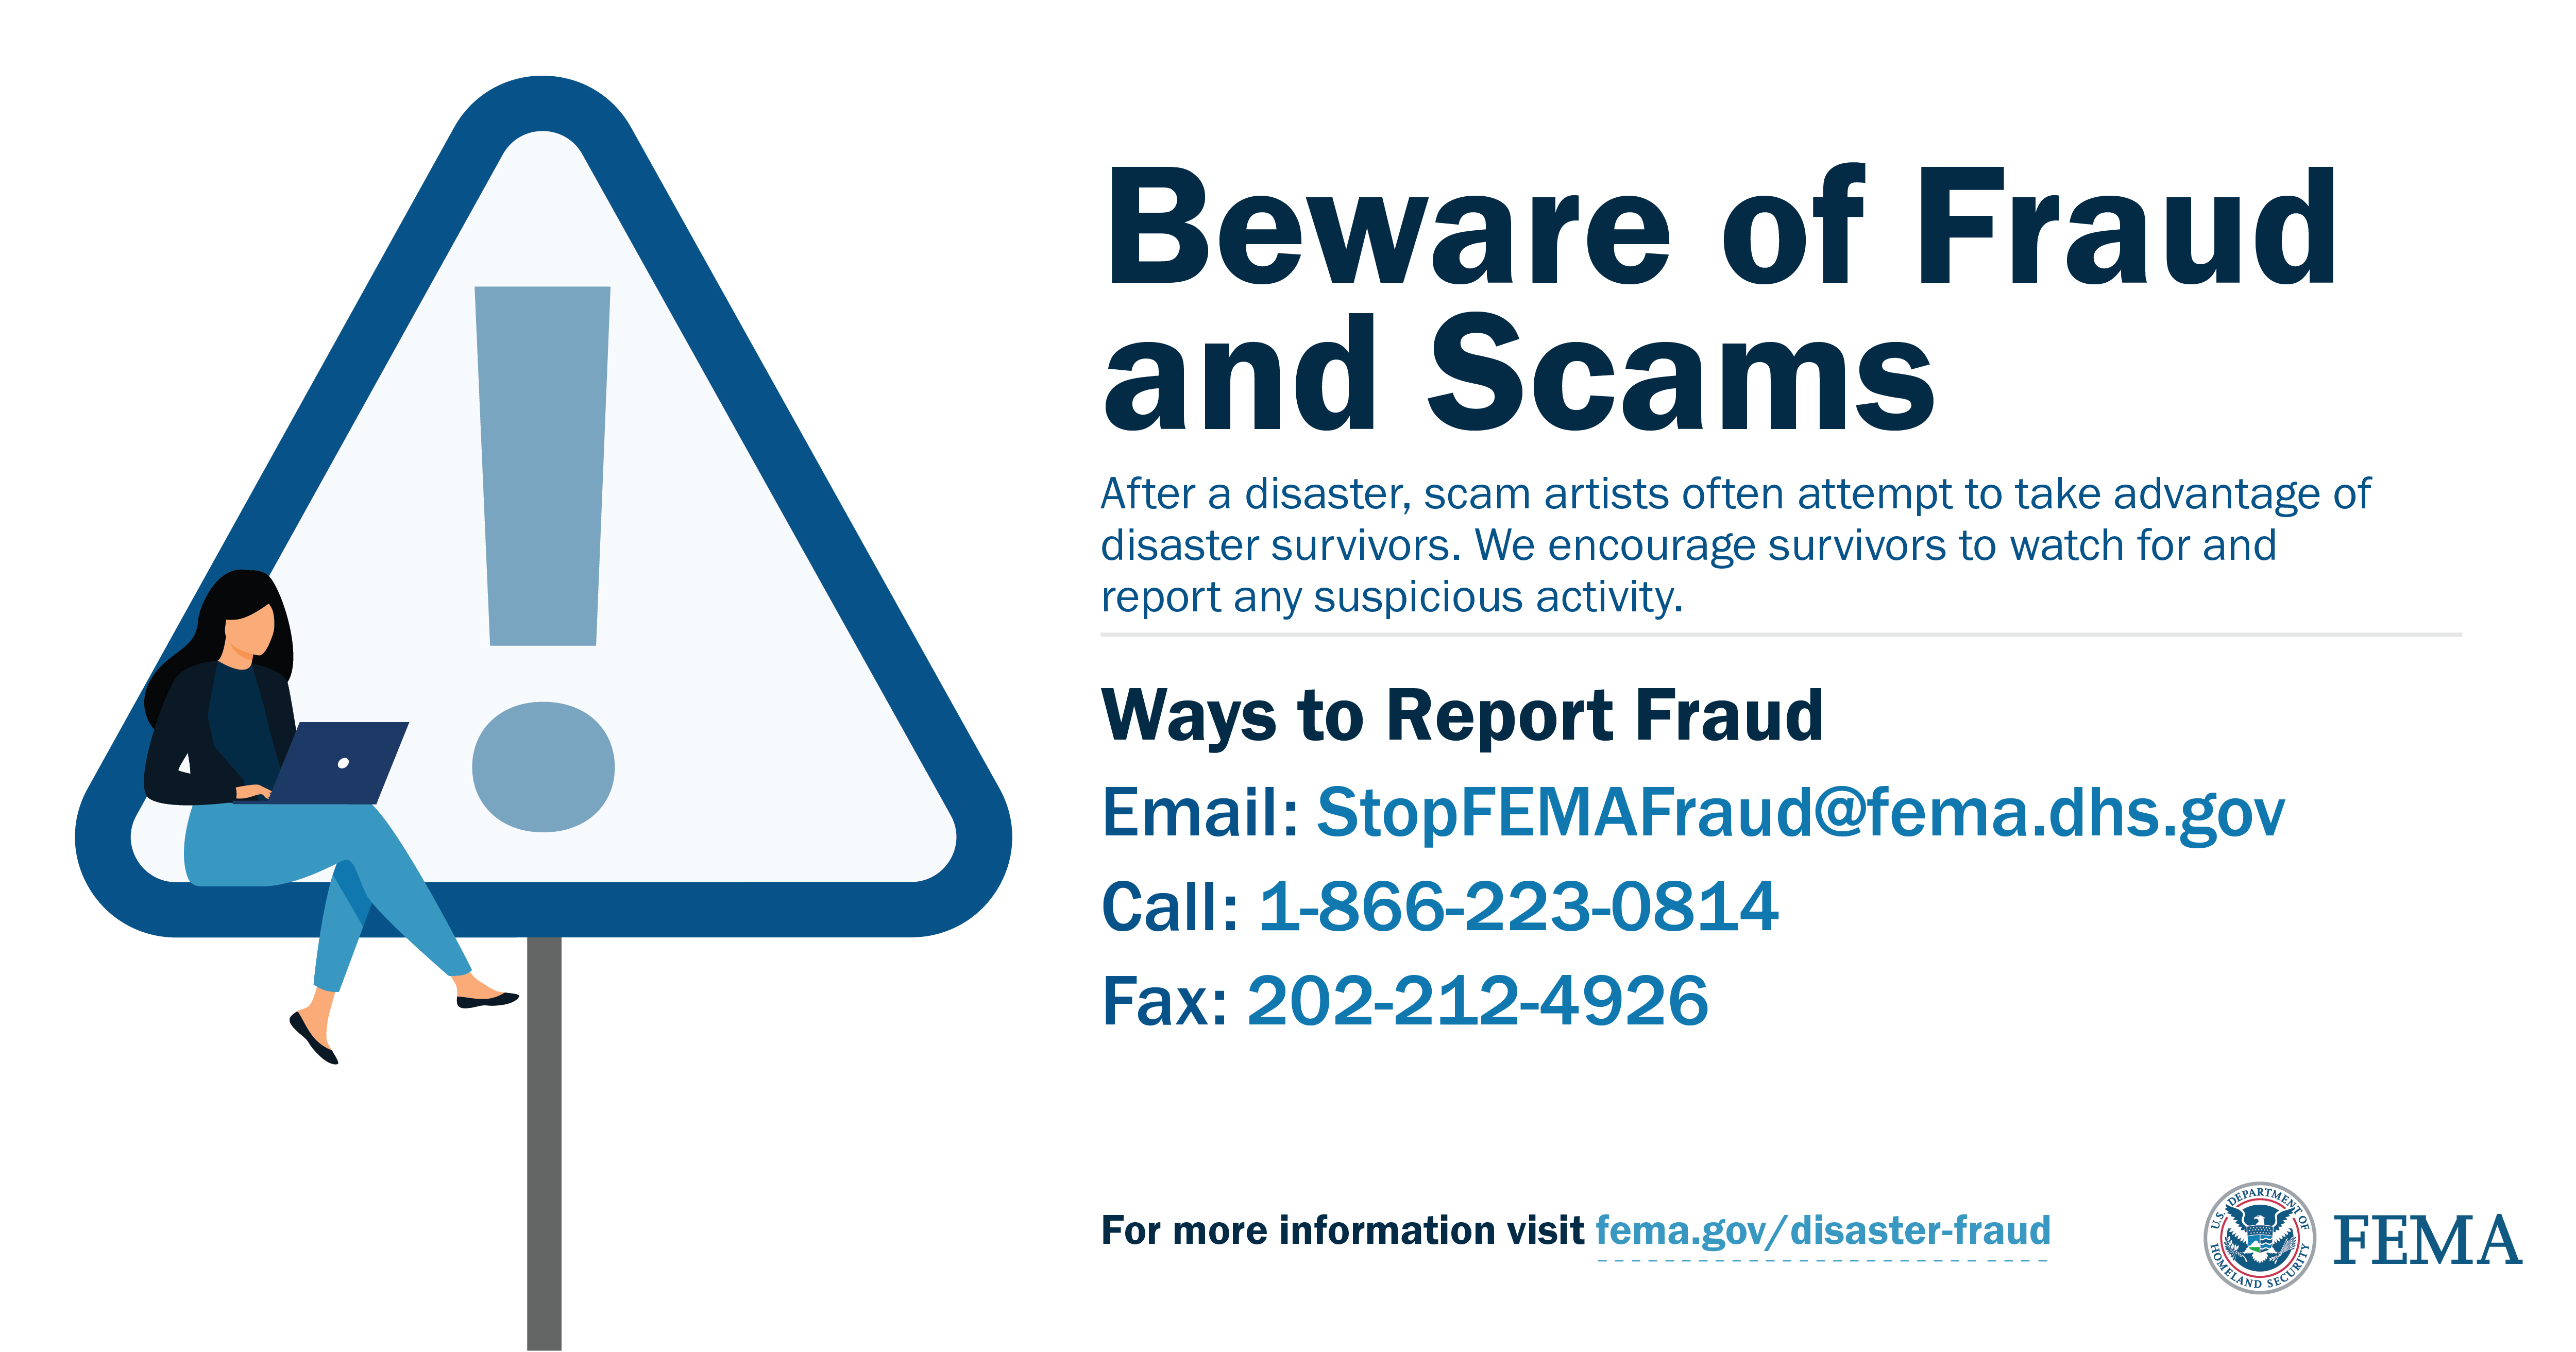 Beware of Fraud and Scams 